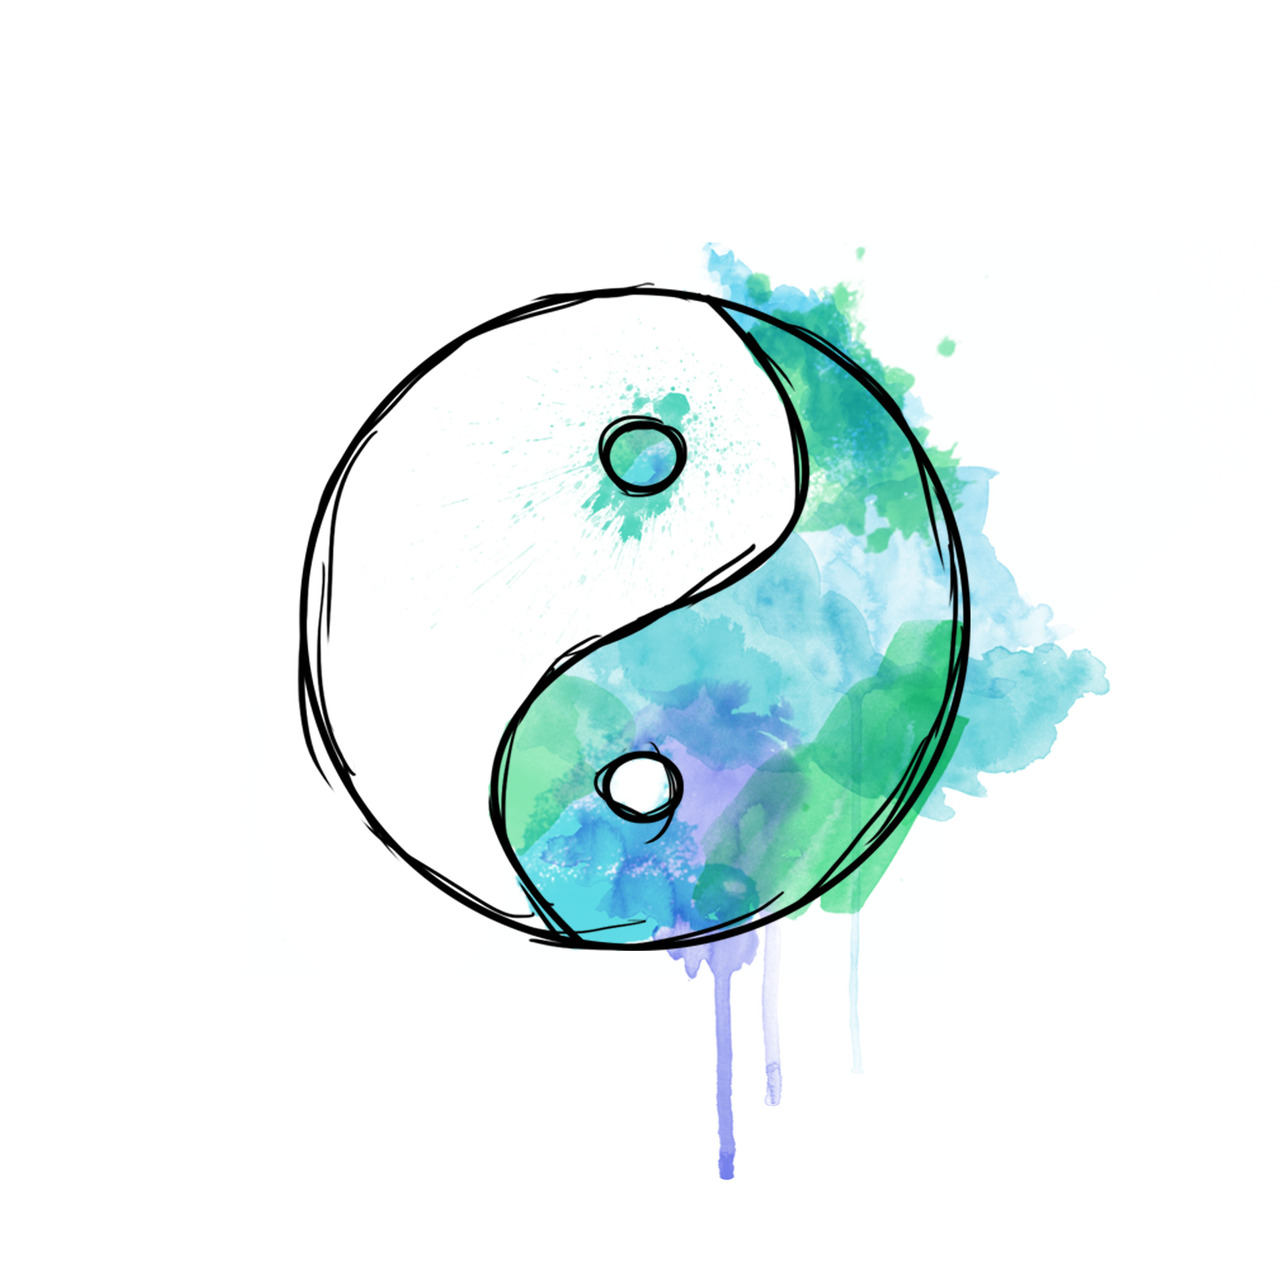 Yin Yang Wallpaper Images Pictures   Becuo